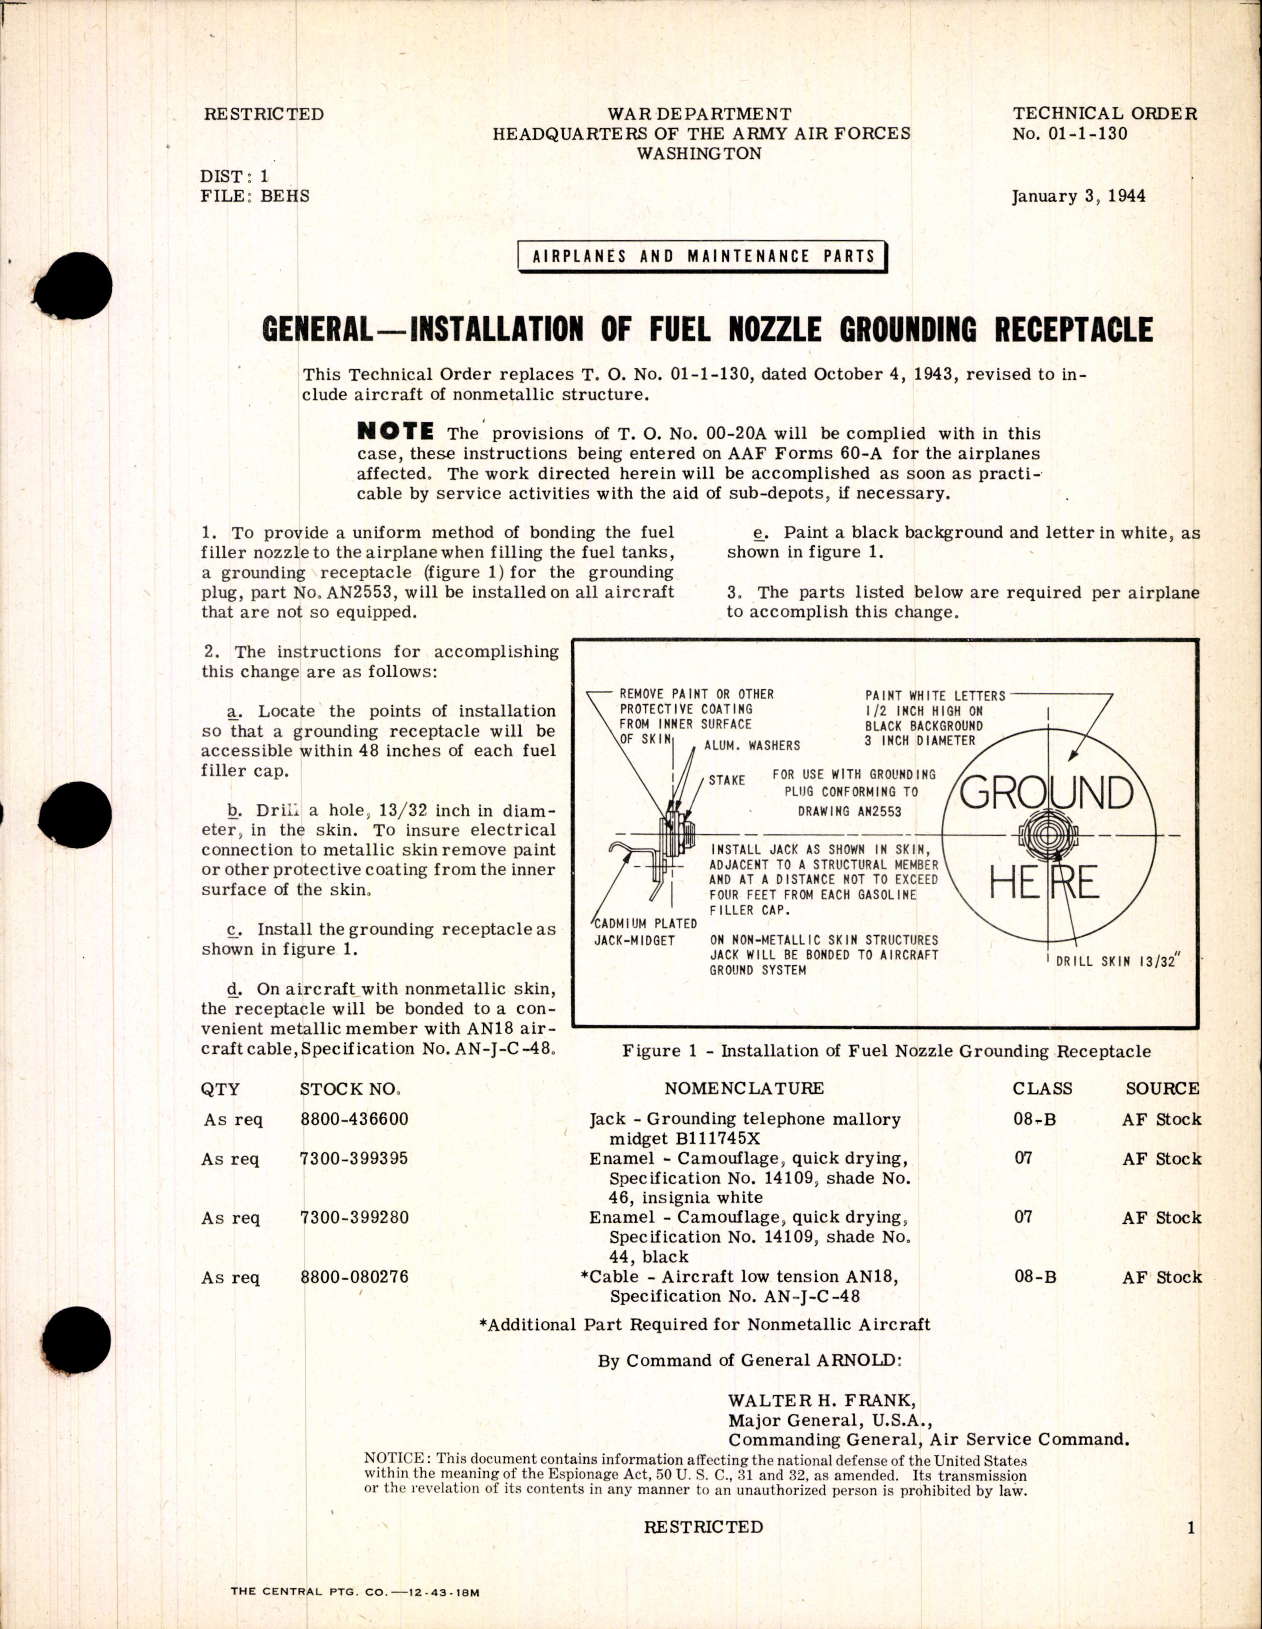 Sample page 1 from AirCorps Library document: Installation of Fuel Nozzle Grounding Receptacle